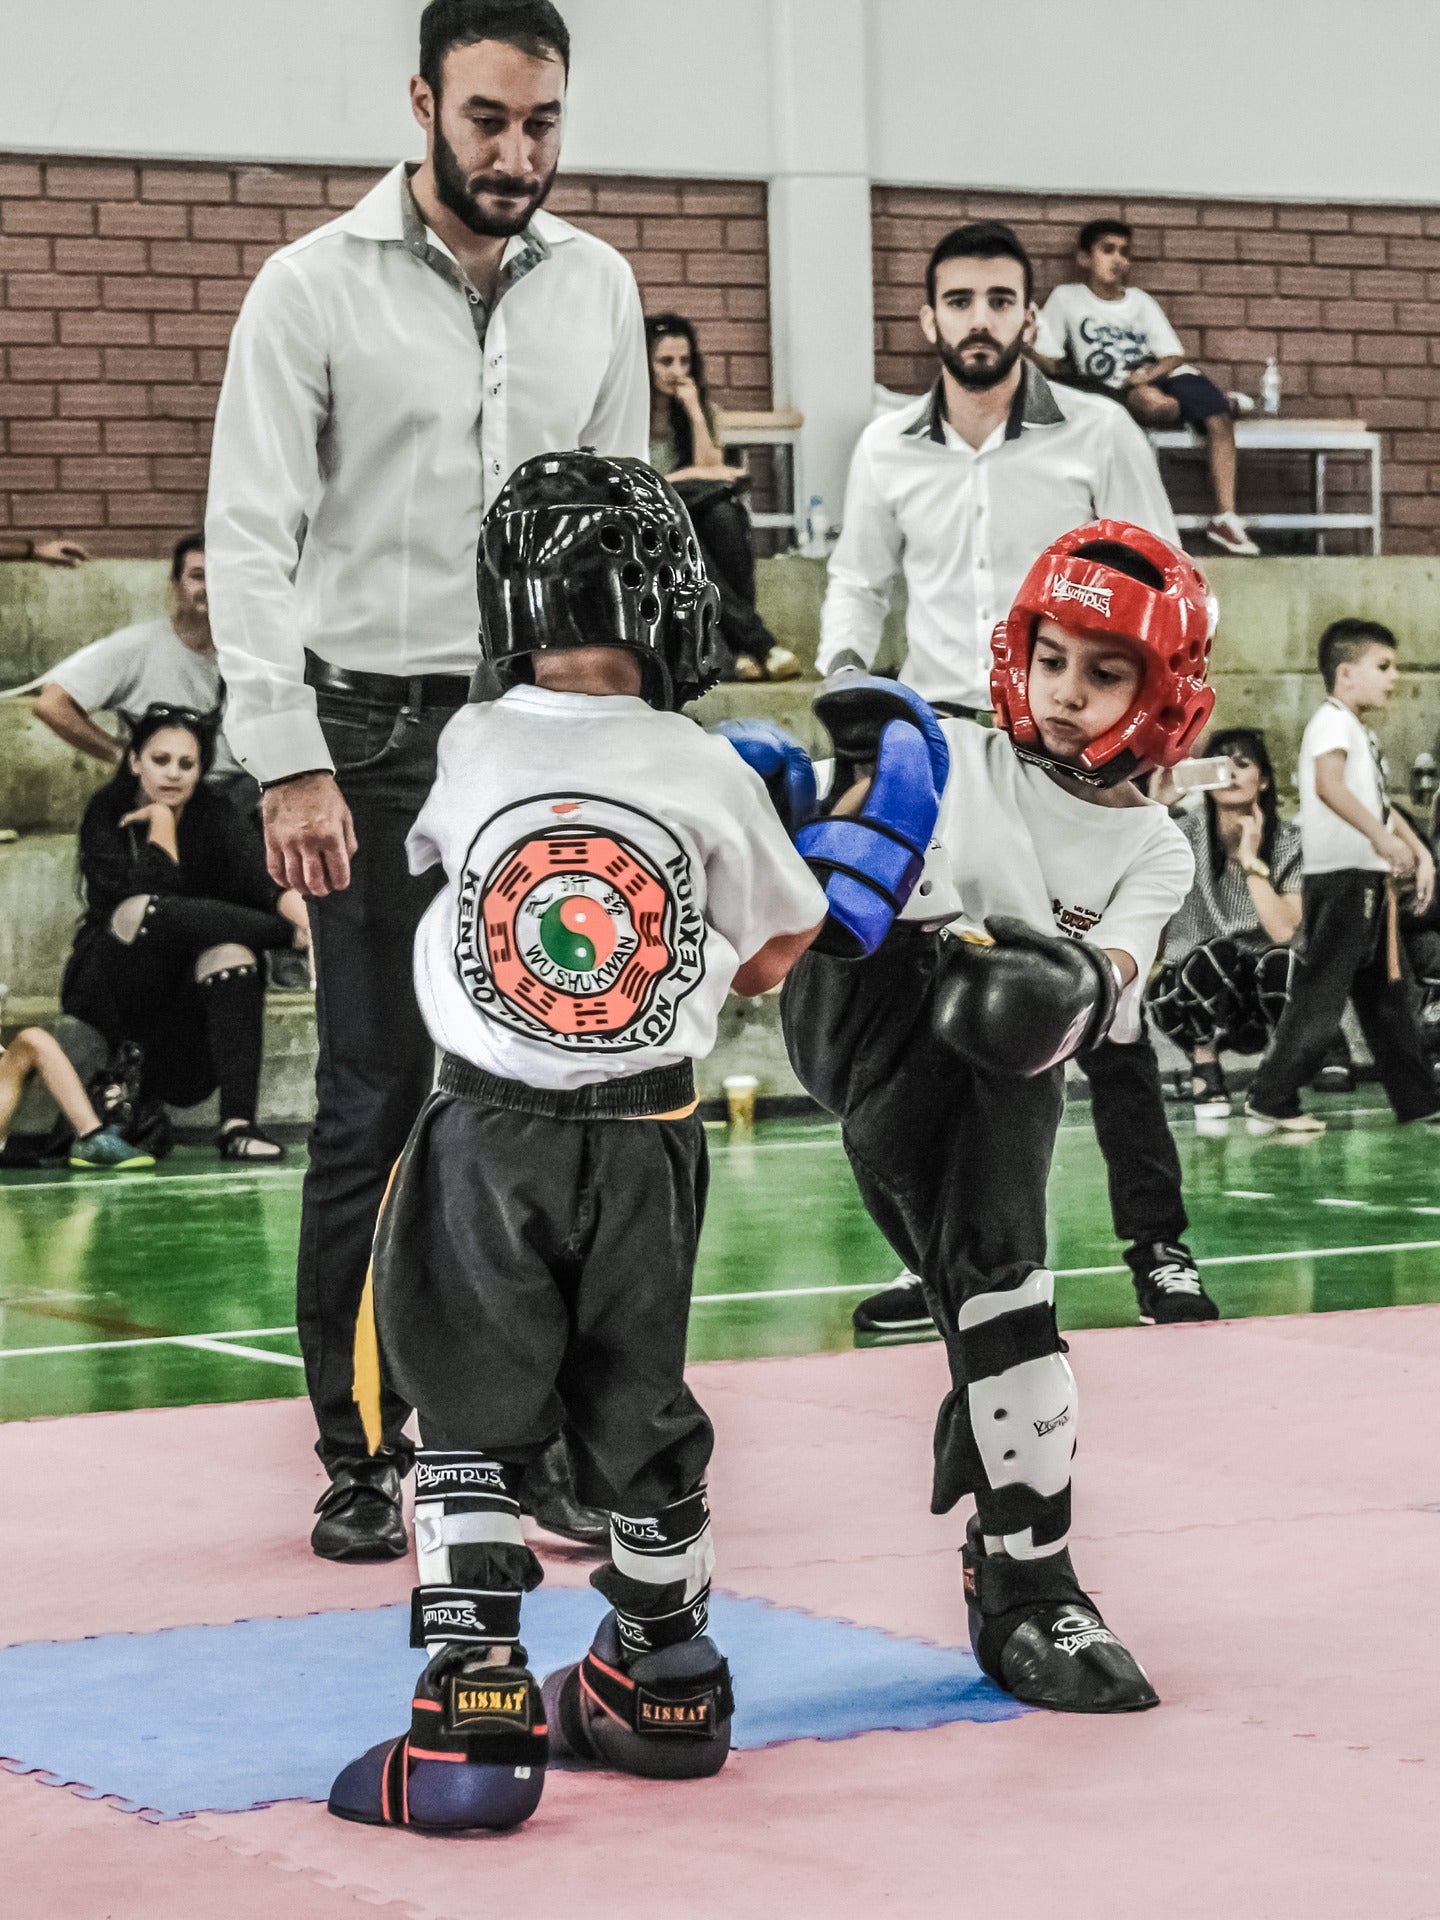 Boys Comfortable Protective Cup for Karate Keeps Son Safe